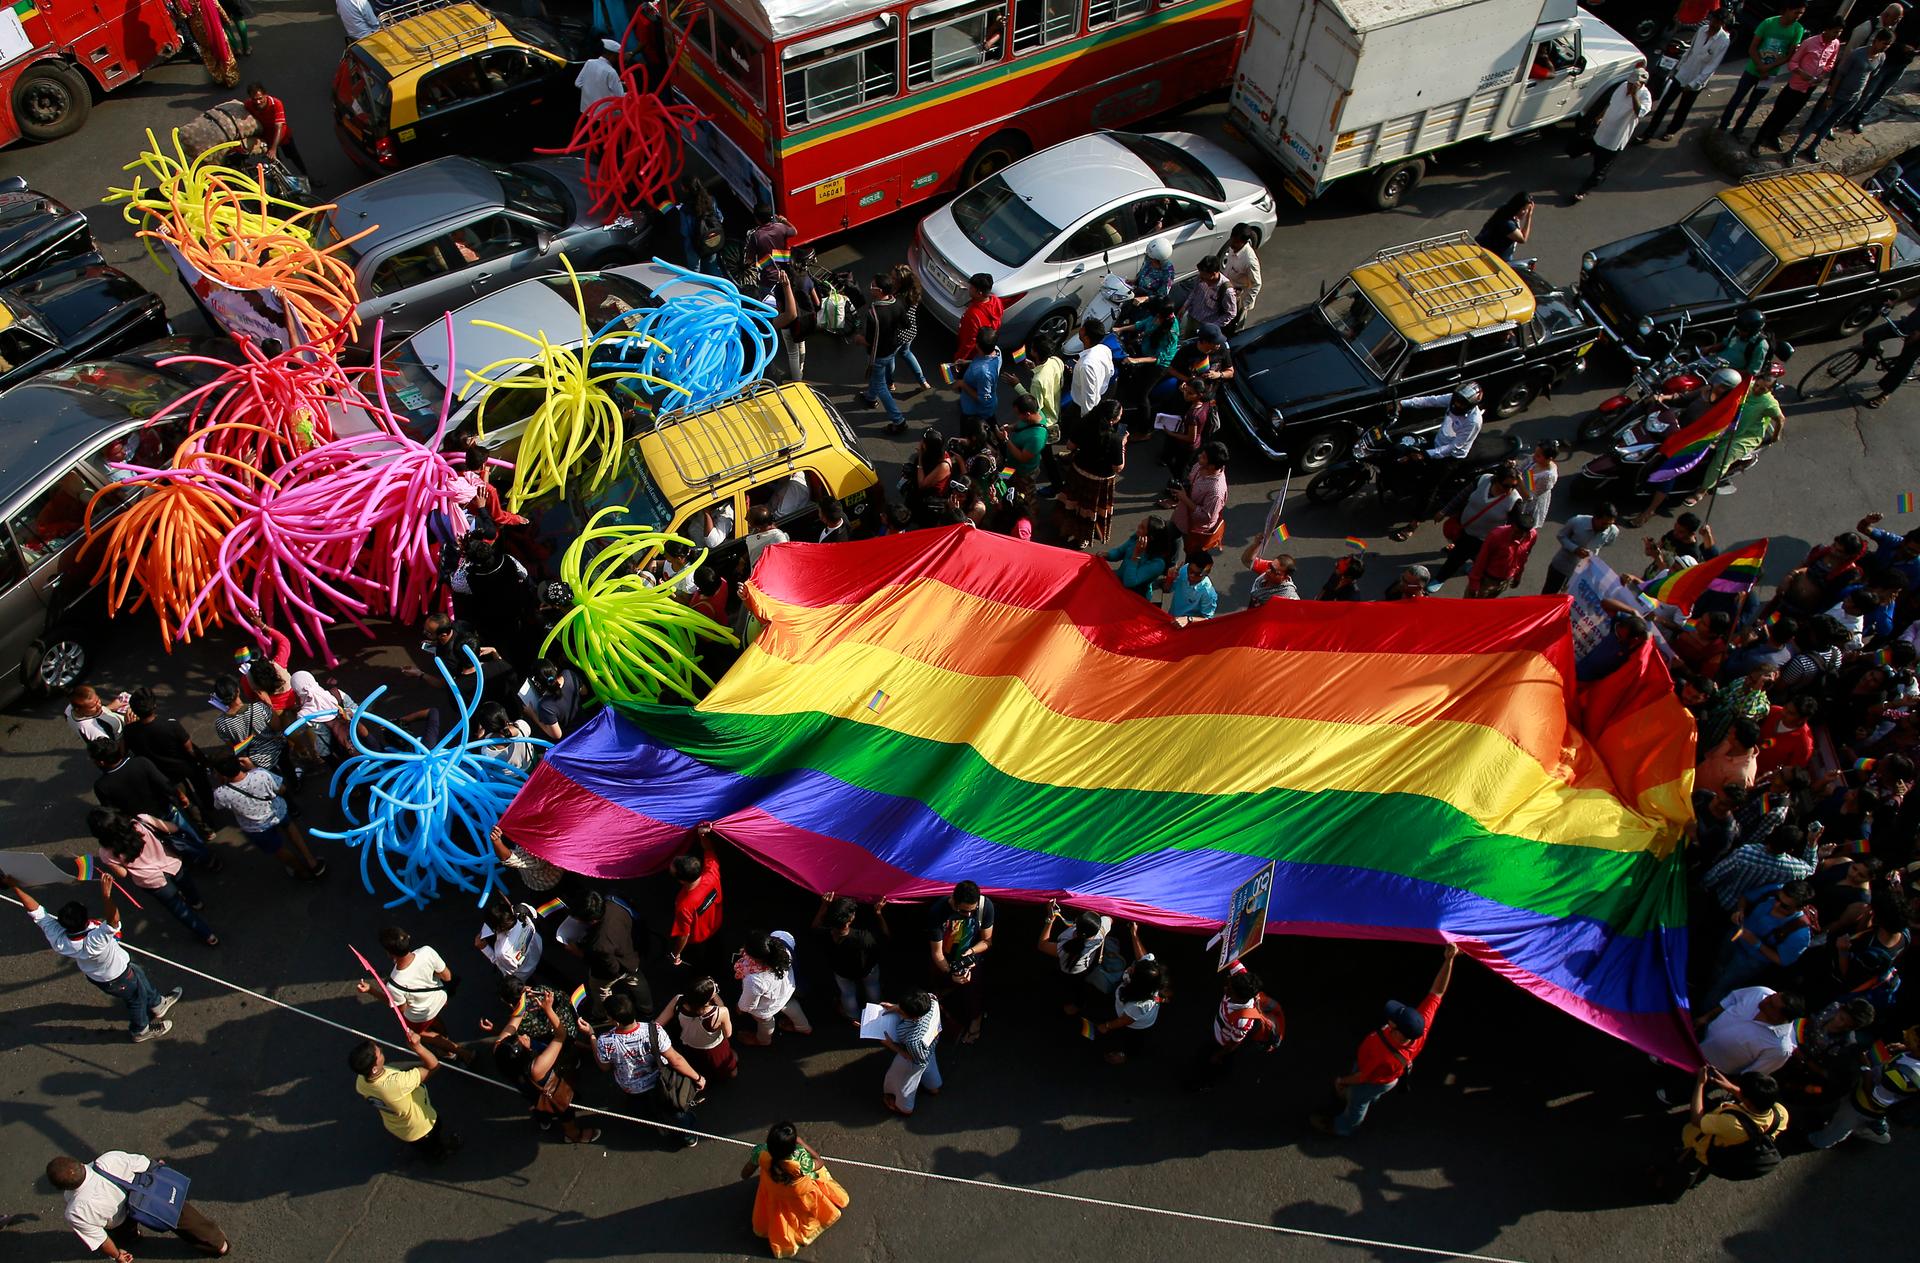 Participants holding a rainbow flag pass through a junction during a gay pride parade, which is promoting gay, lesbian, bisexual and transgender rights, in Mumbai, January 31, 2015. 